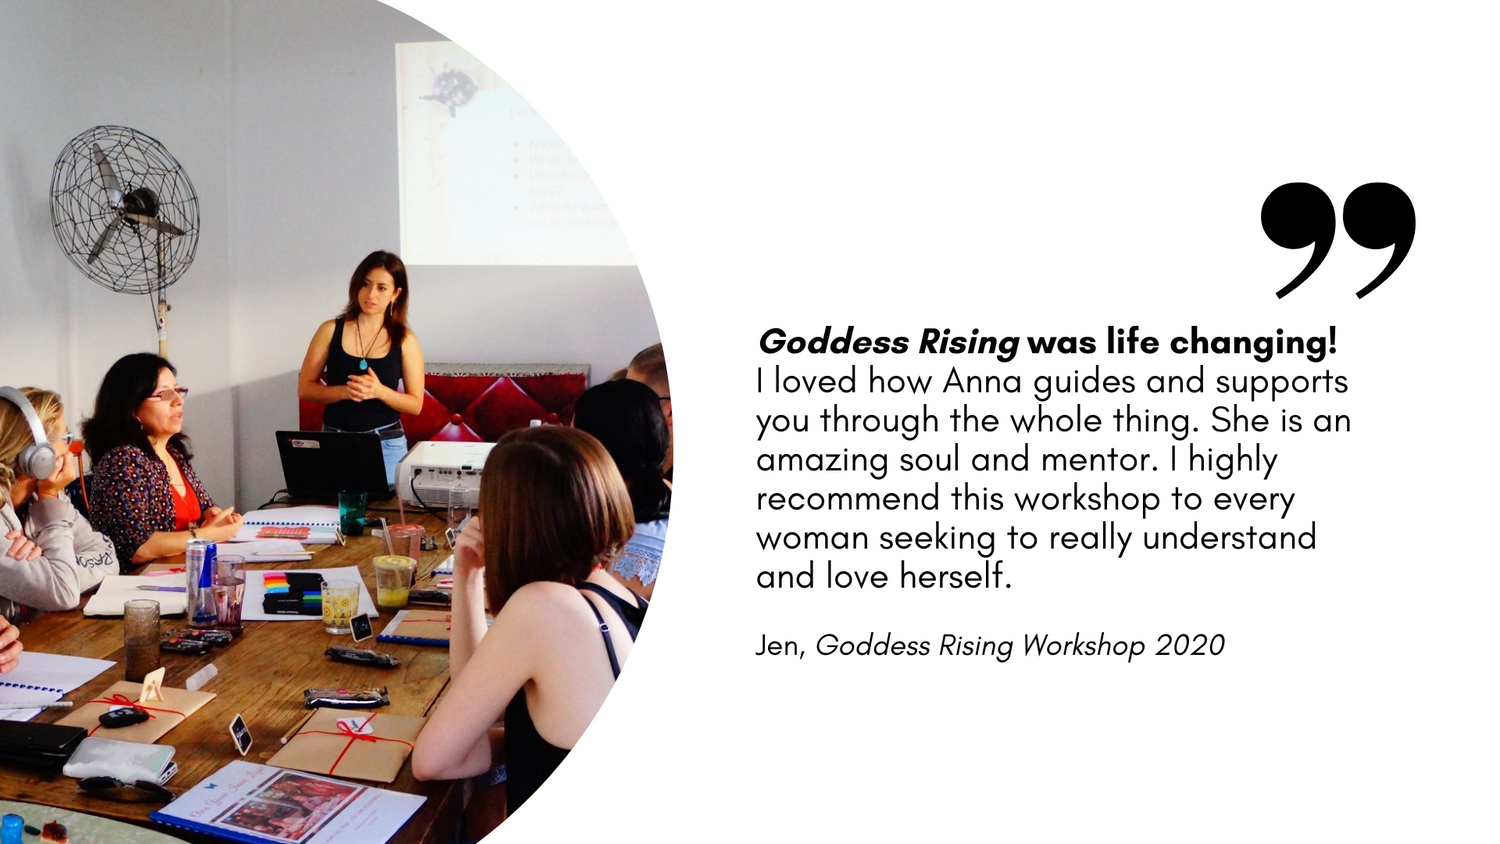 Jen's review about Anna Krjatian's Goddess Rising Workshop with an image of Anna standing at the head of the table where a group of people sit and listen as one person speaks.